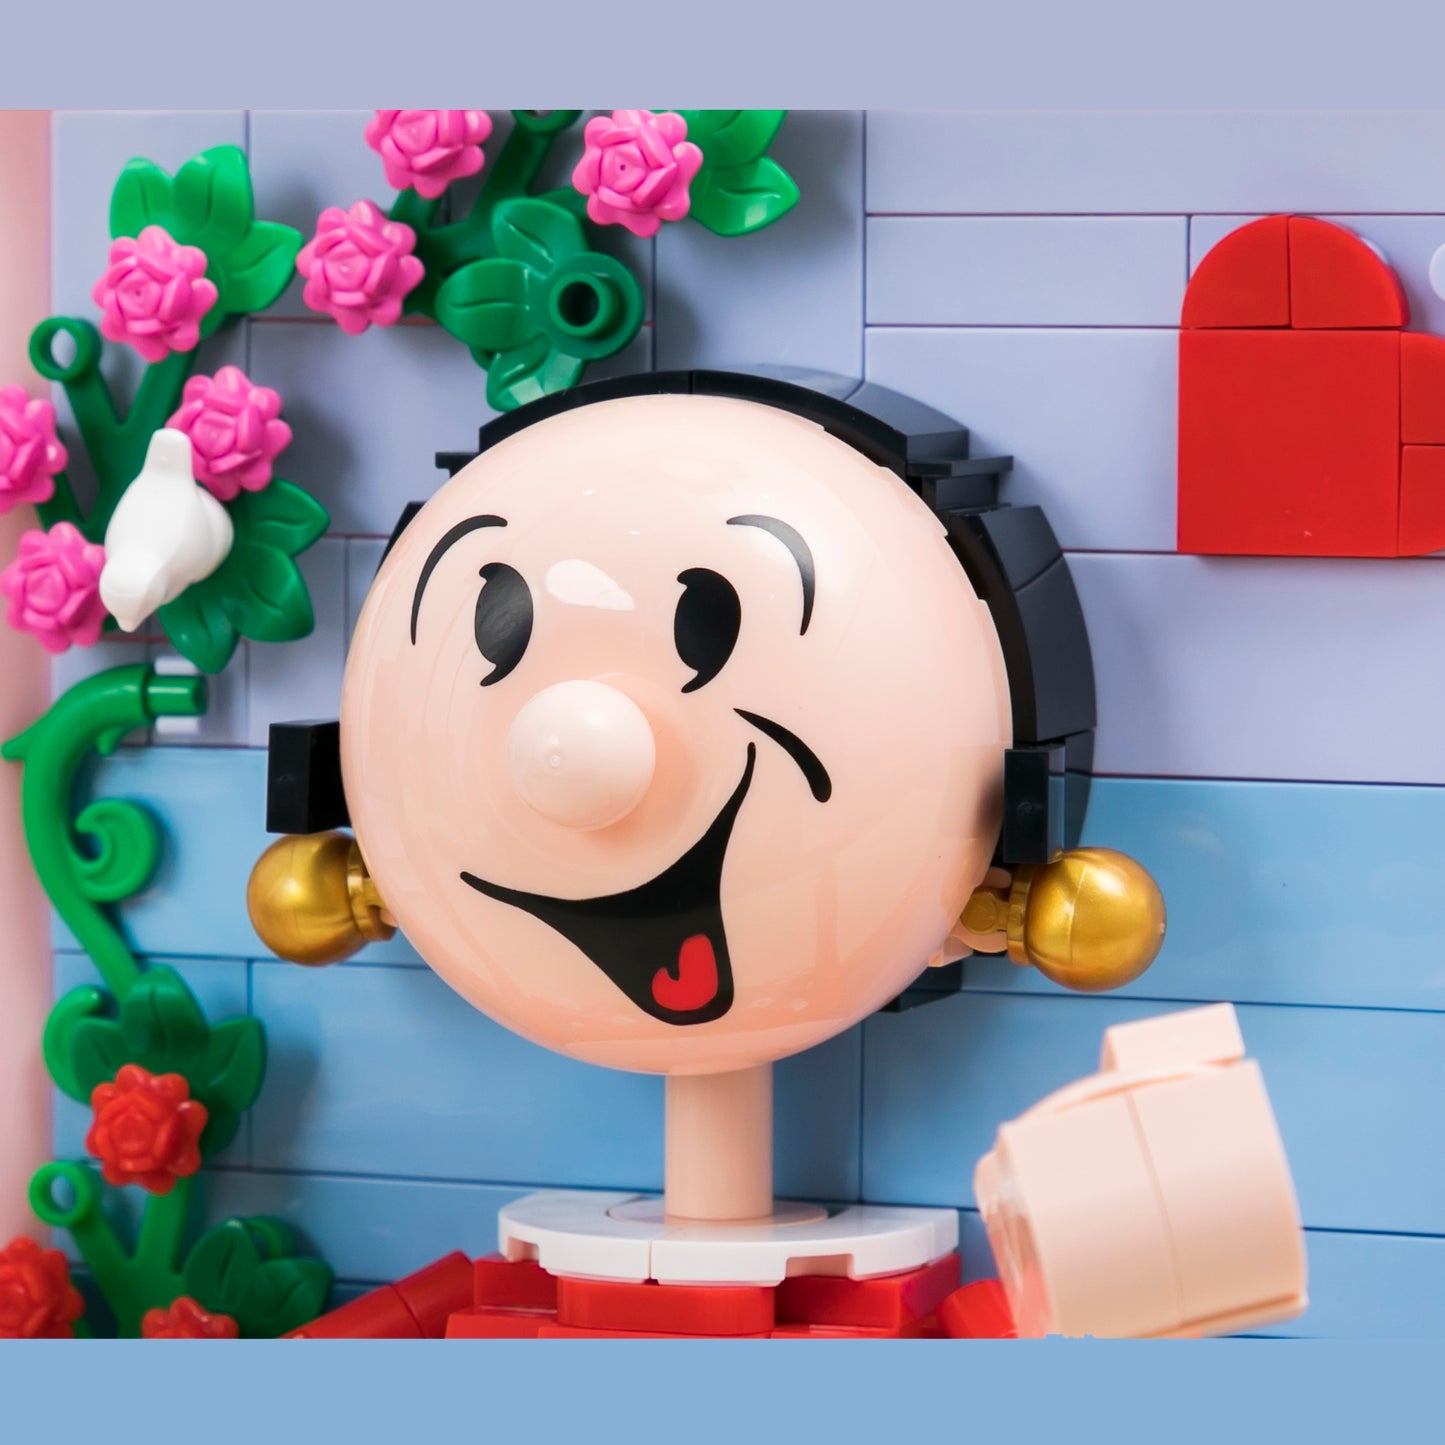 Pantasy Popeye Olive Oyl 3D Picture (86404)